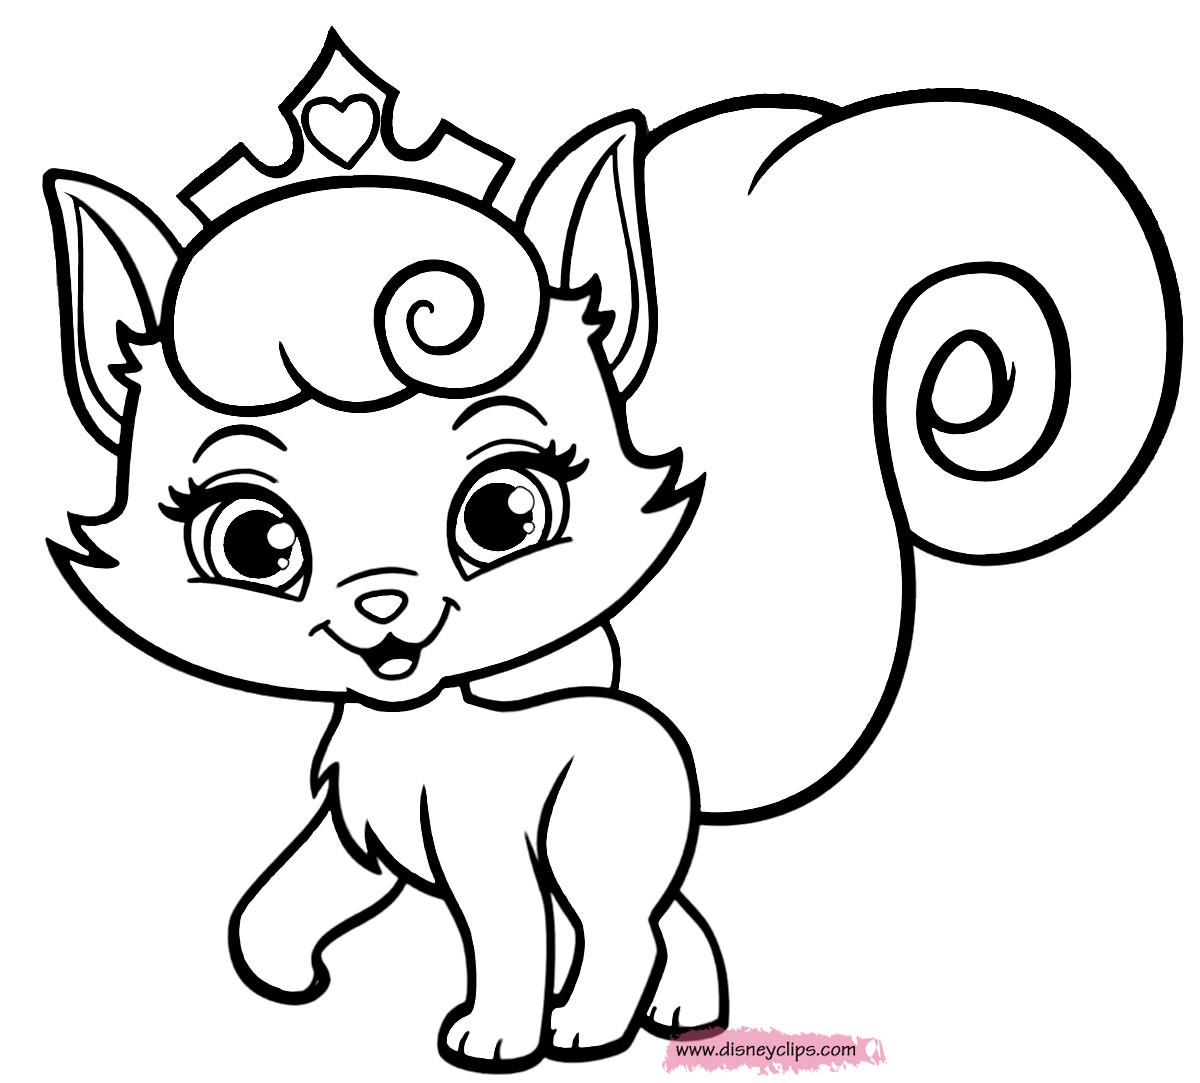 Kitten Coloring Pages For Kids
 Kitten And Puppy Coloring Pages To Print Coloring Home